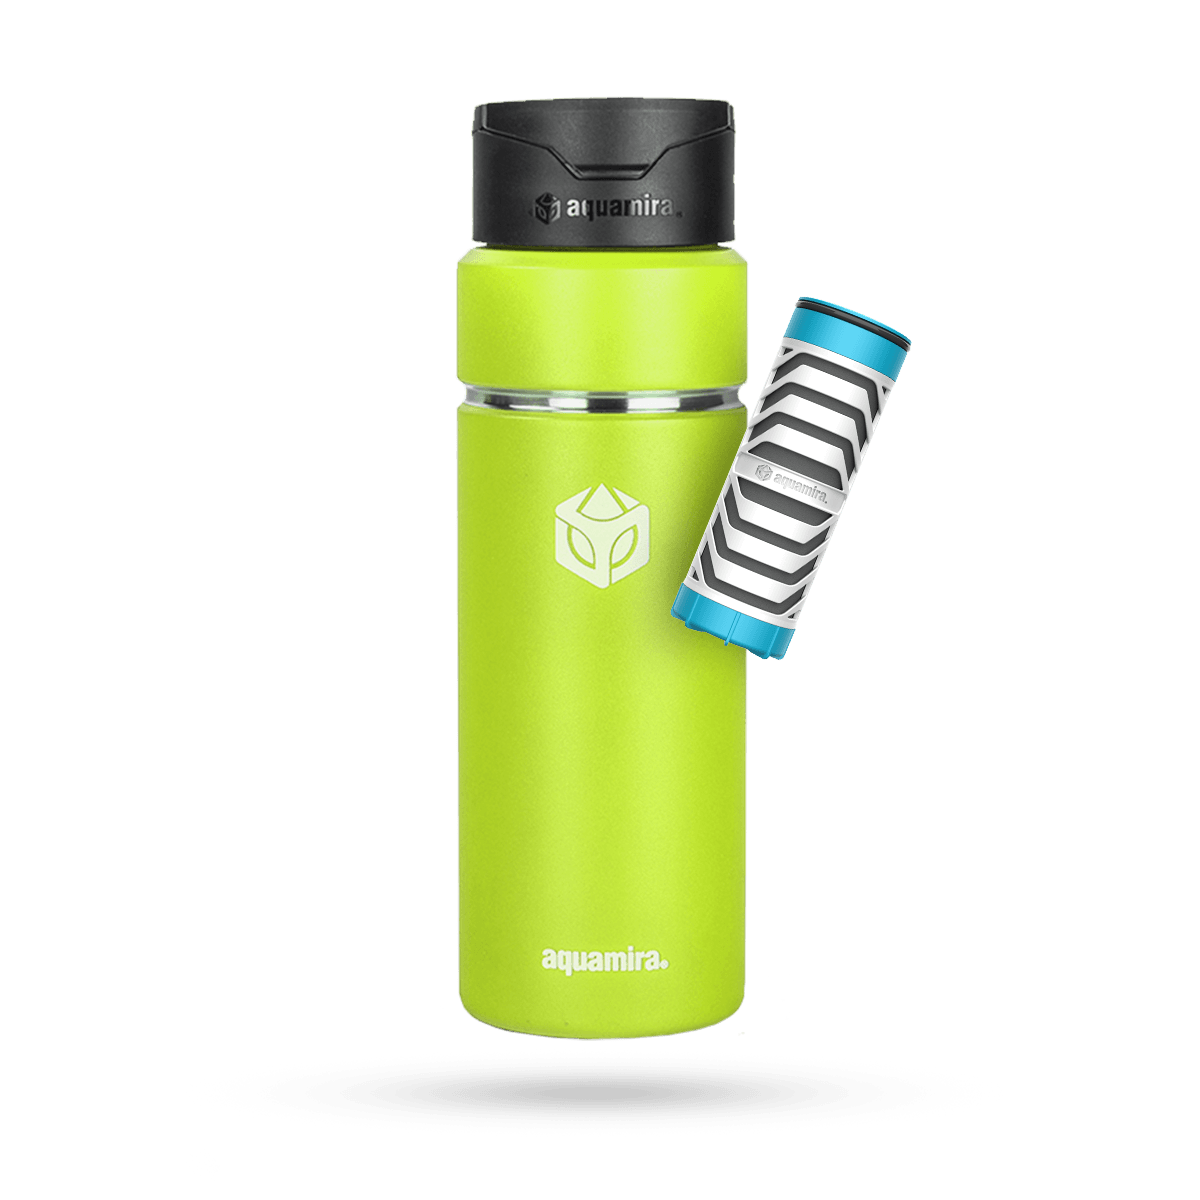 MIRA 24oz Insulated Stainless Steel Water Bottle Hydro Thermos